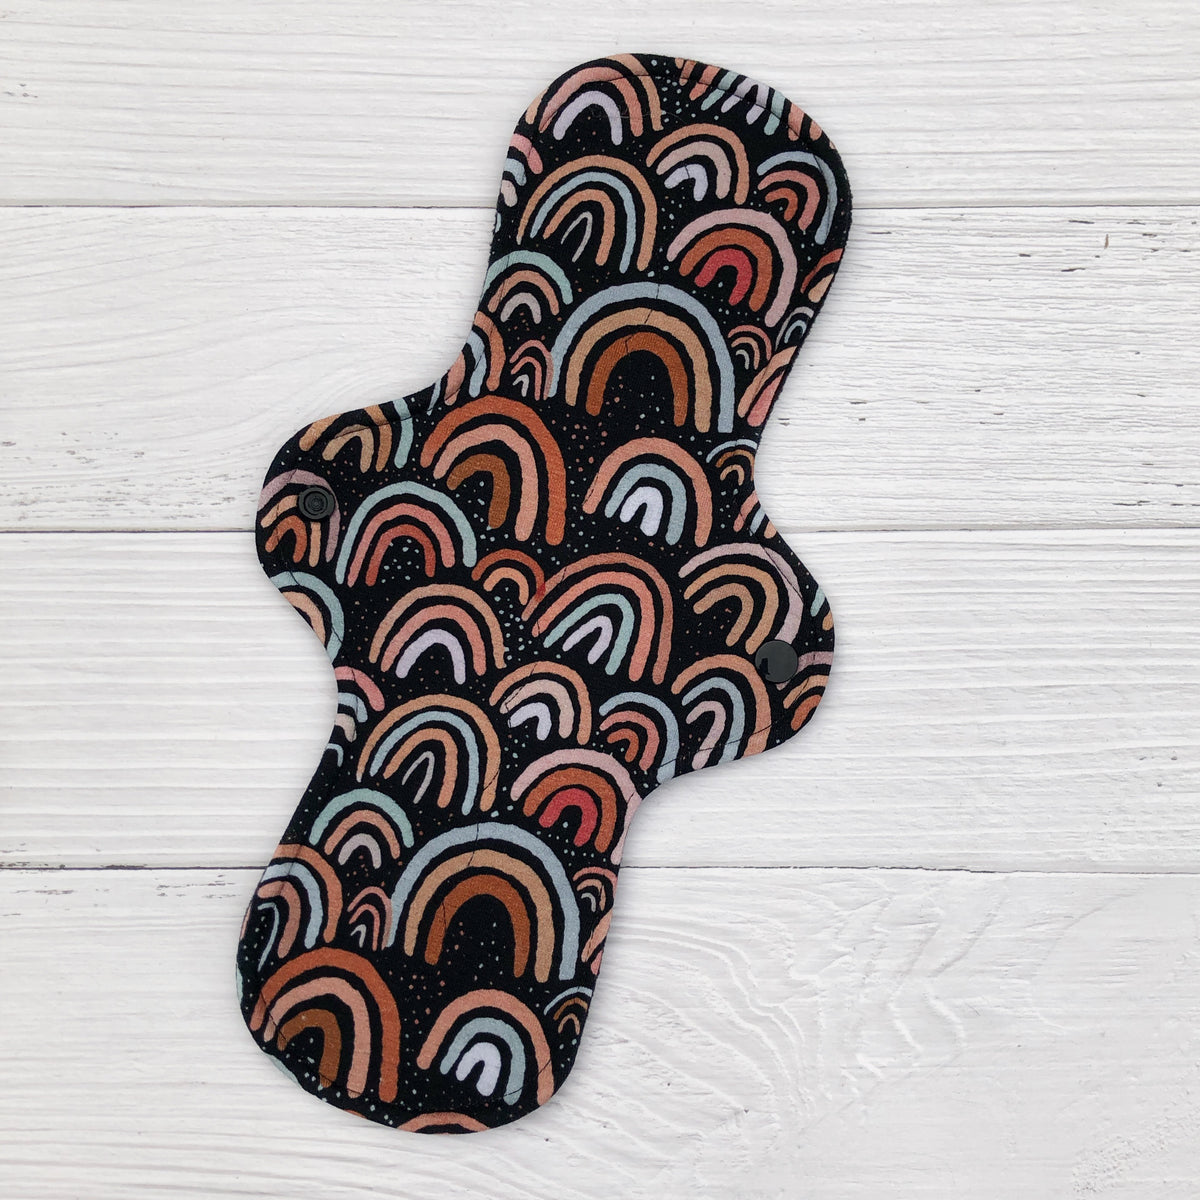 reusable pad in a neutral rainbow on dark brown print on a white wood background